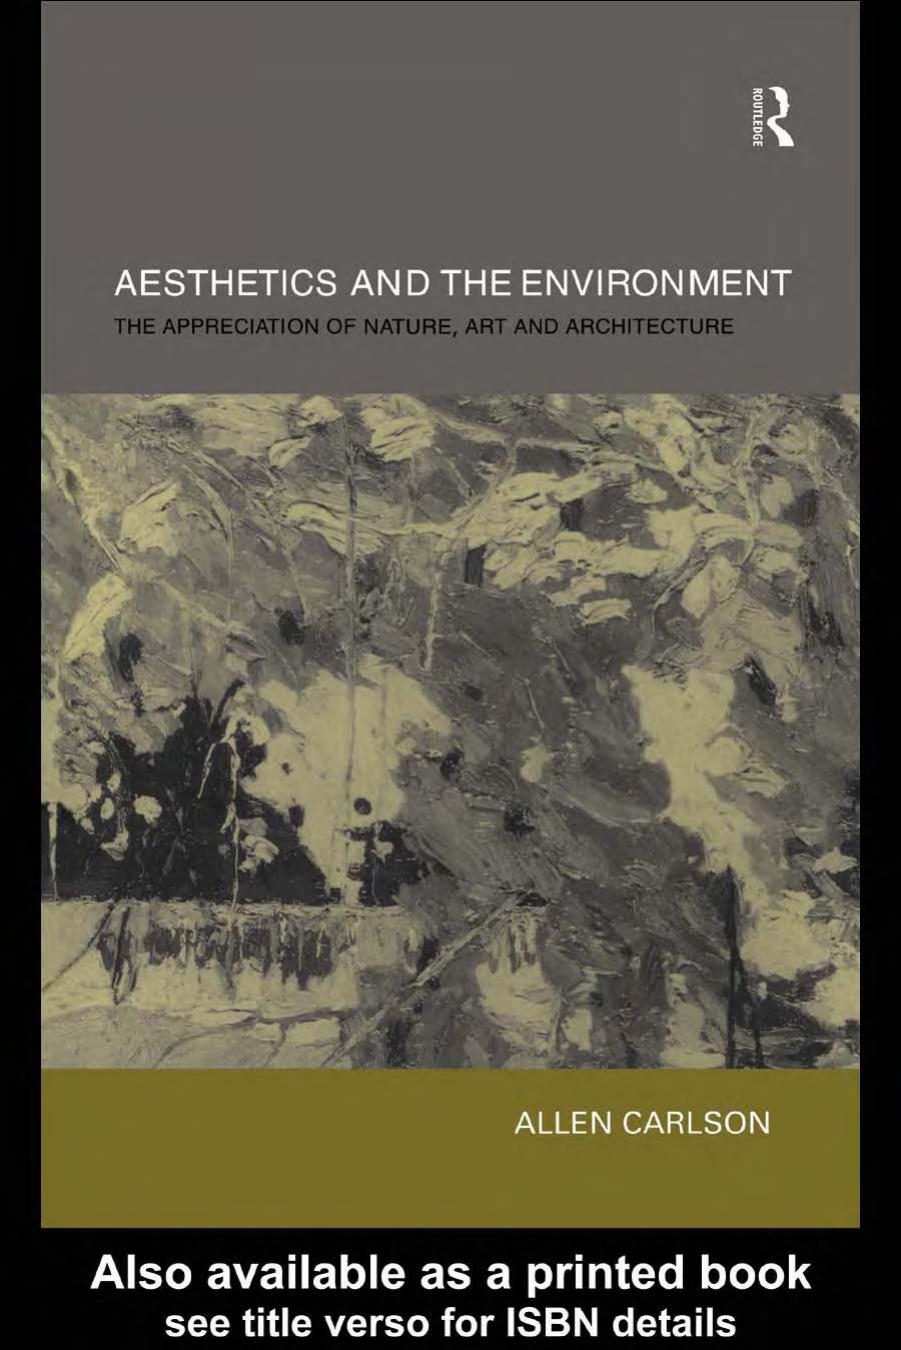 [Allen Carlson] Aesthetics and the Environment Th 2000